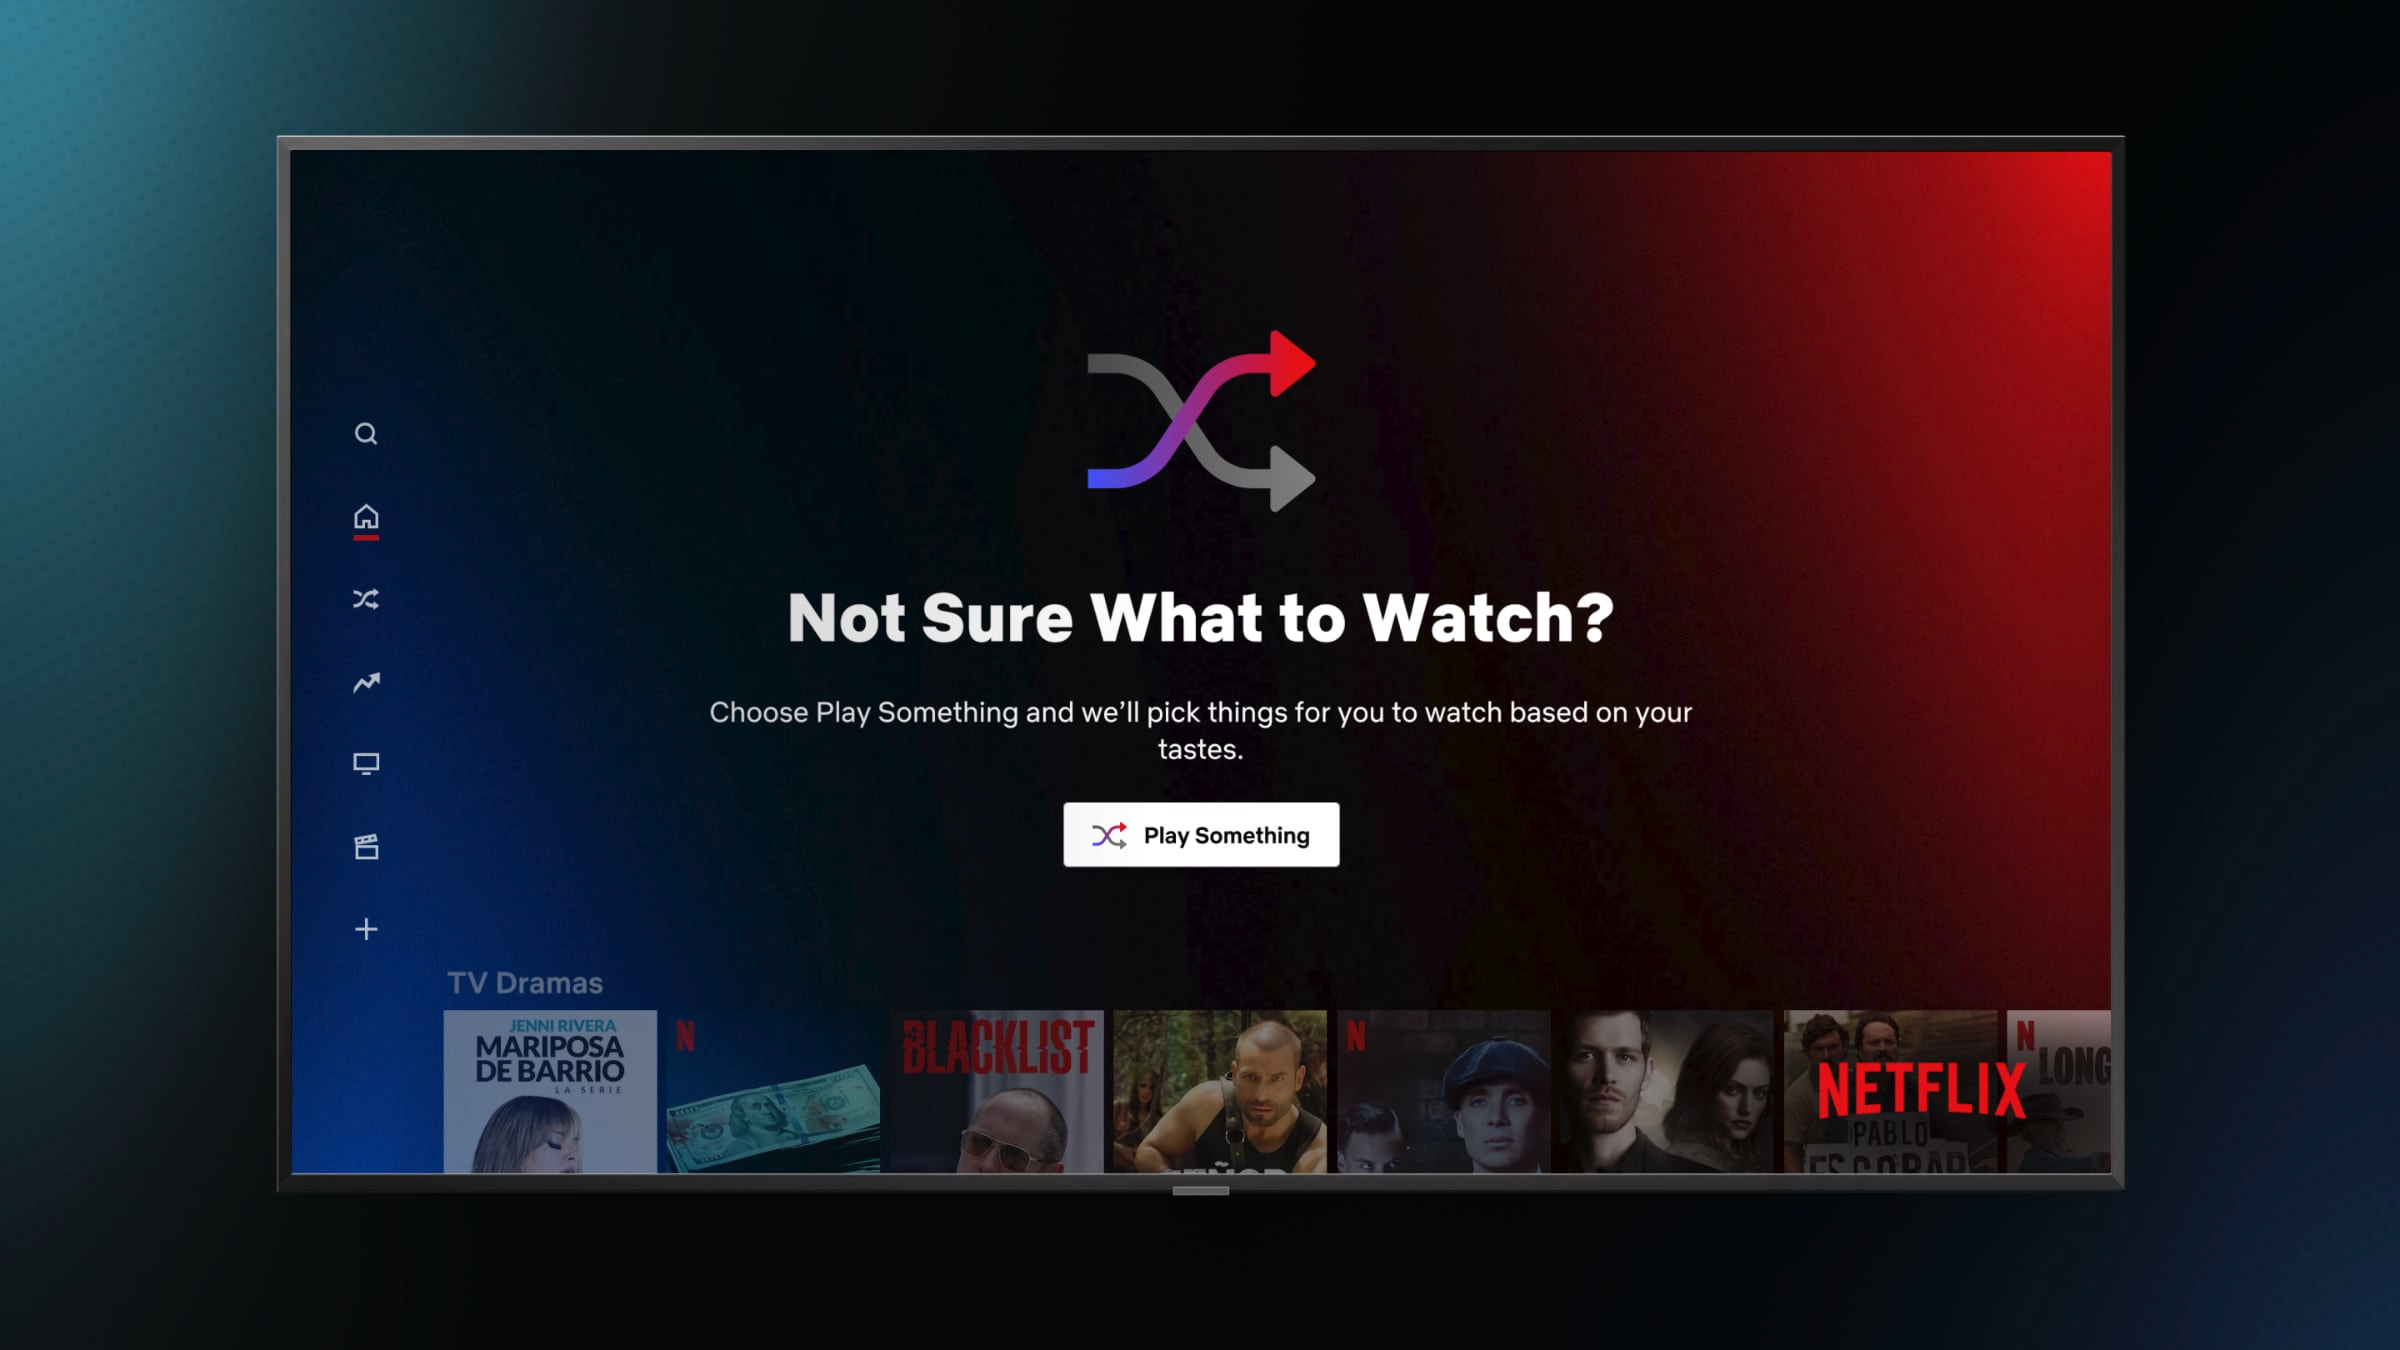 netflix-rolls-out-play-something-feature-to-tvs,-android-devices-to-follow